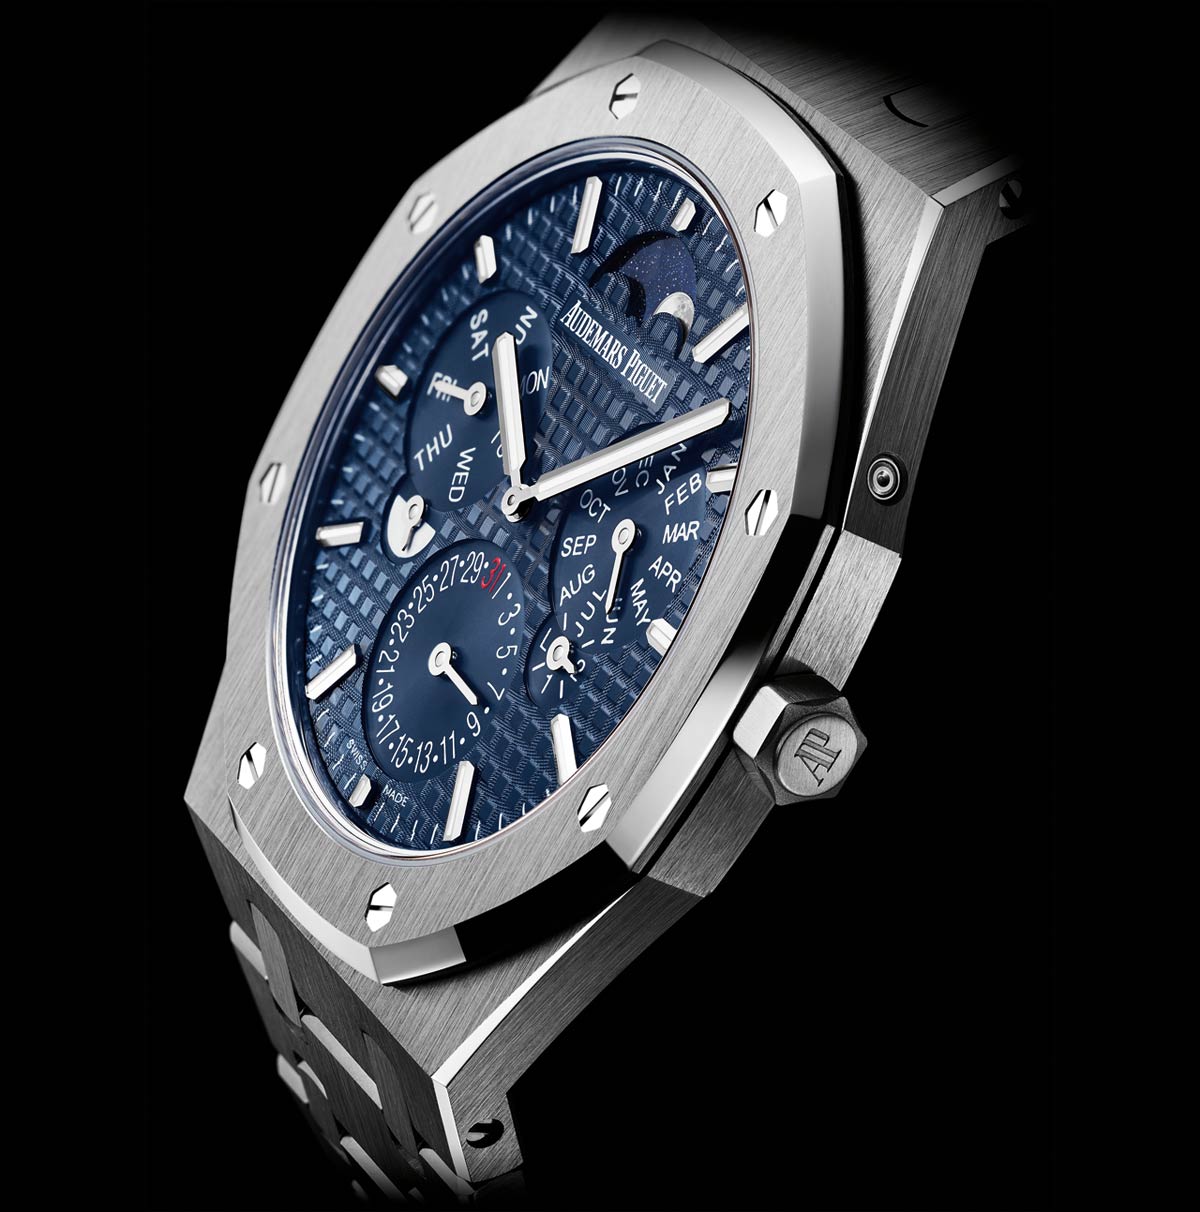 SIHH 2018: Audemars Piguet - Royal Oak RD#2 | Time and Watches | The ...